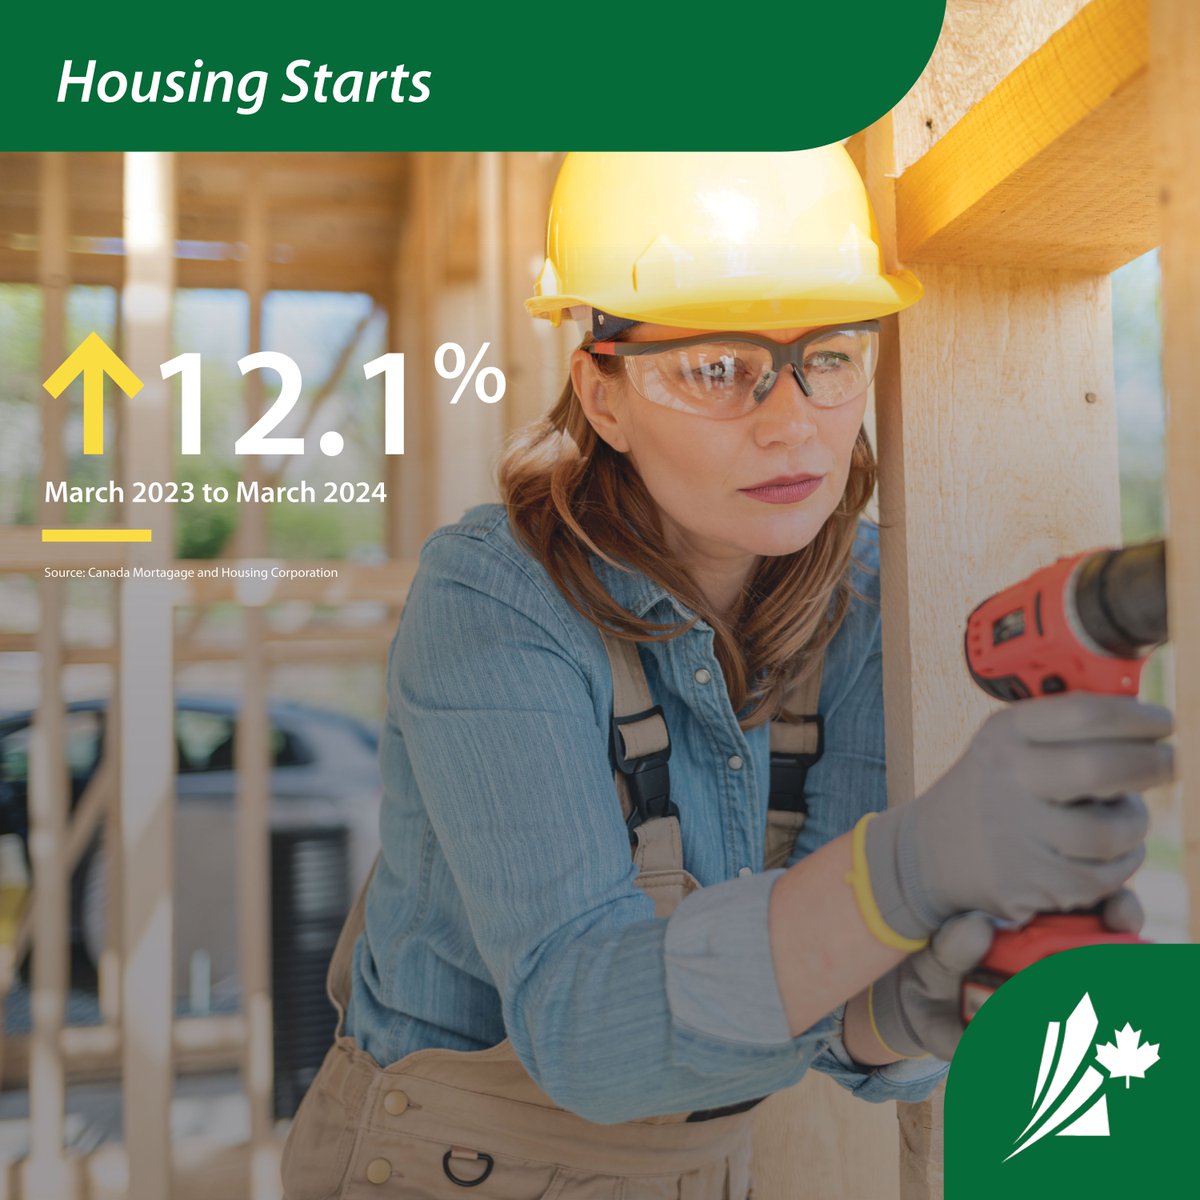 Saskatchewan housing construction continues to grow with a 12.1 per cent increase in starts from March 2023 to March 2024. Learn more: saskatchewan.ca/government/new… #InvestSK